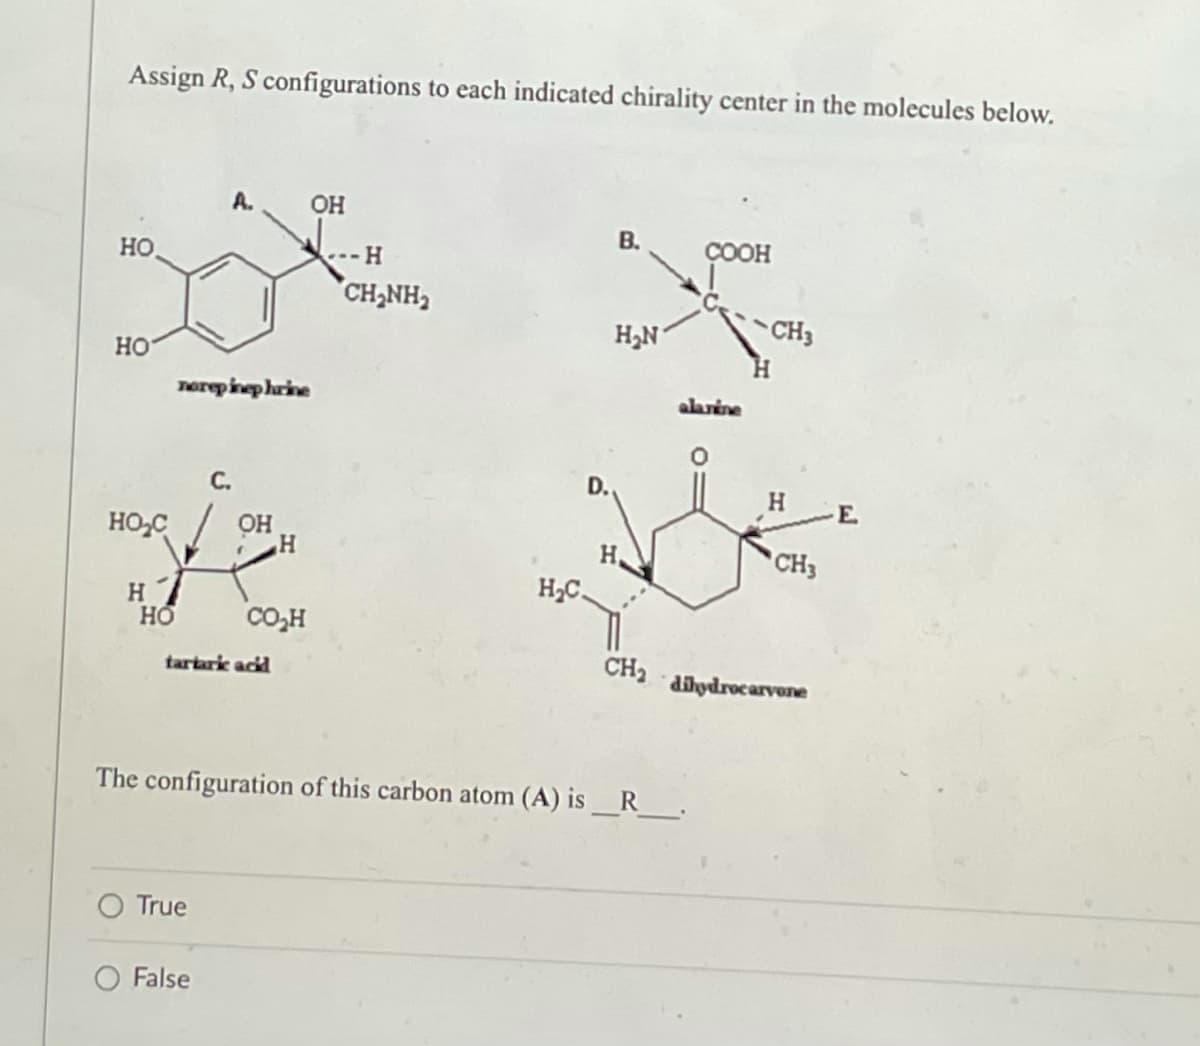 Assign R, S configurations to each indicated chirality center in the molecules below.
OH
B.
HO
COOH
H₂N
HO
HO₂C
H
HO
norepinephrine
H
CO₂H
H
CH,NH,
H₂C.
alanine
Н.
CH3
CH3
CH₂ dihydrocarvone
tartaric acid
The configuration of this carbon atom (A) is__R_____.
True
False
H